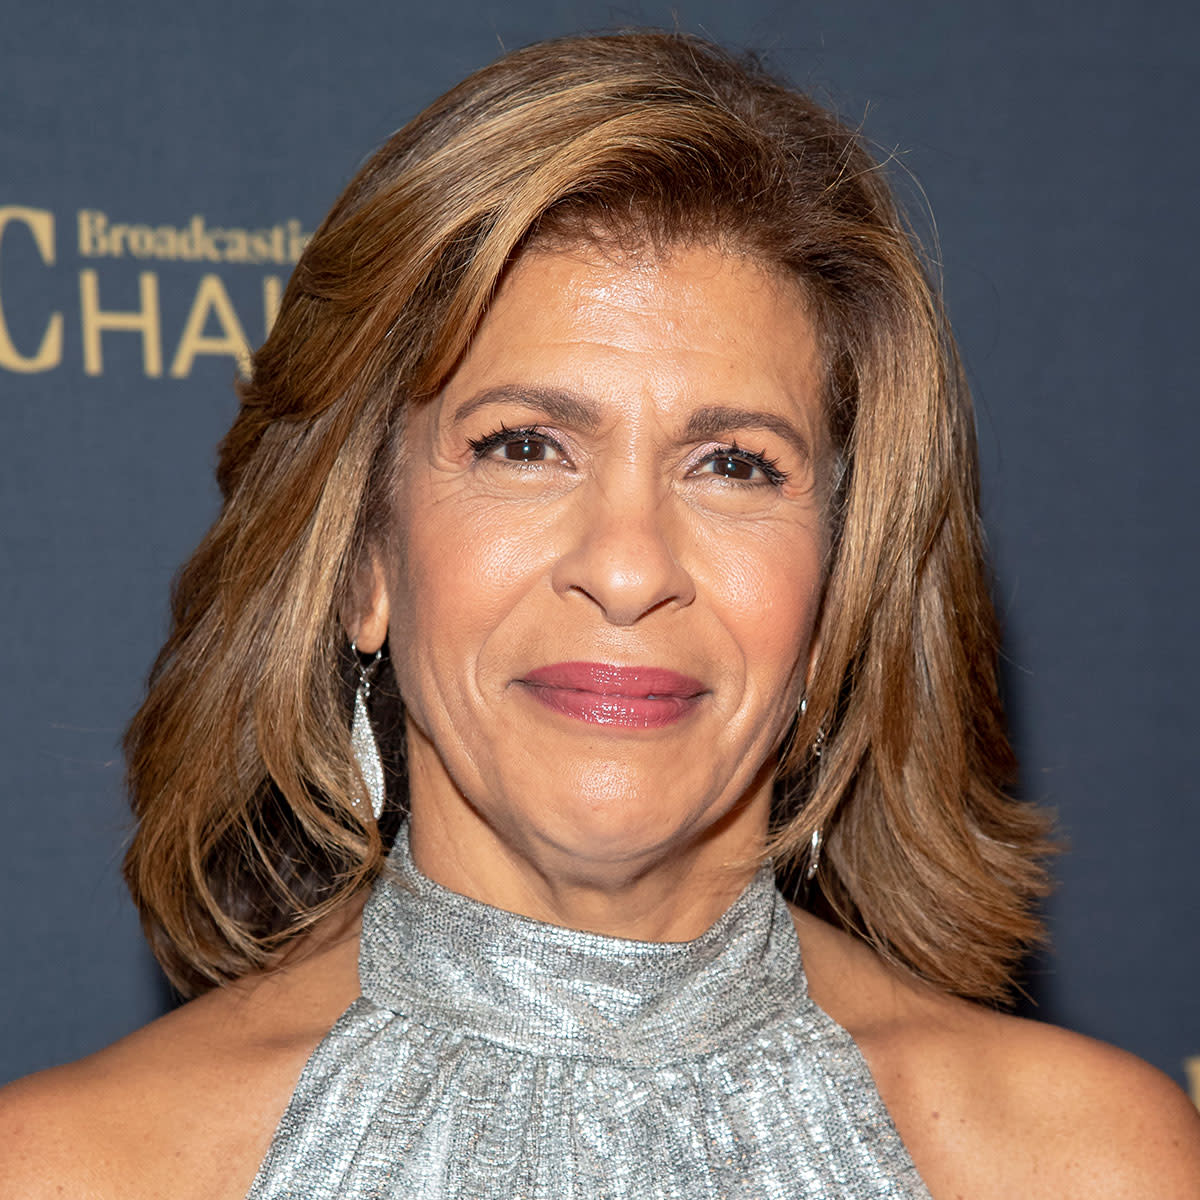 Hoda Kotb at the 30th Broadcasting and Cable Hall of Fame Awards gala